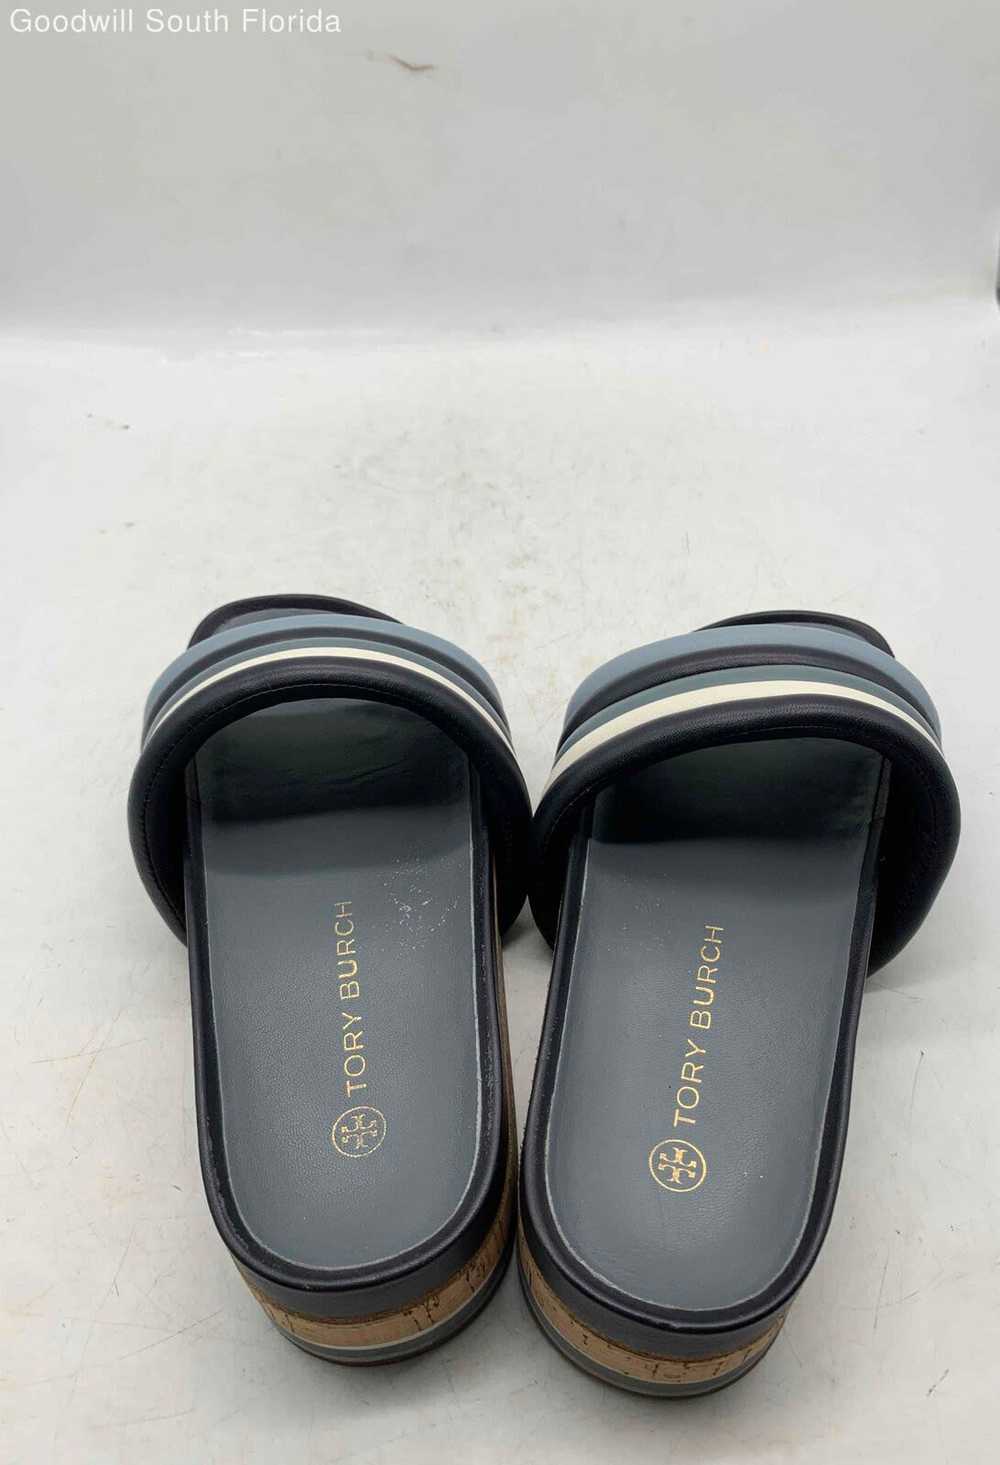 Tory Burch Quilted Platform Sandals Size 8.5 - image 3